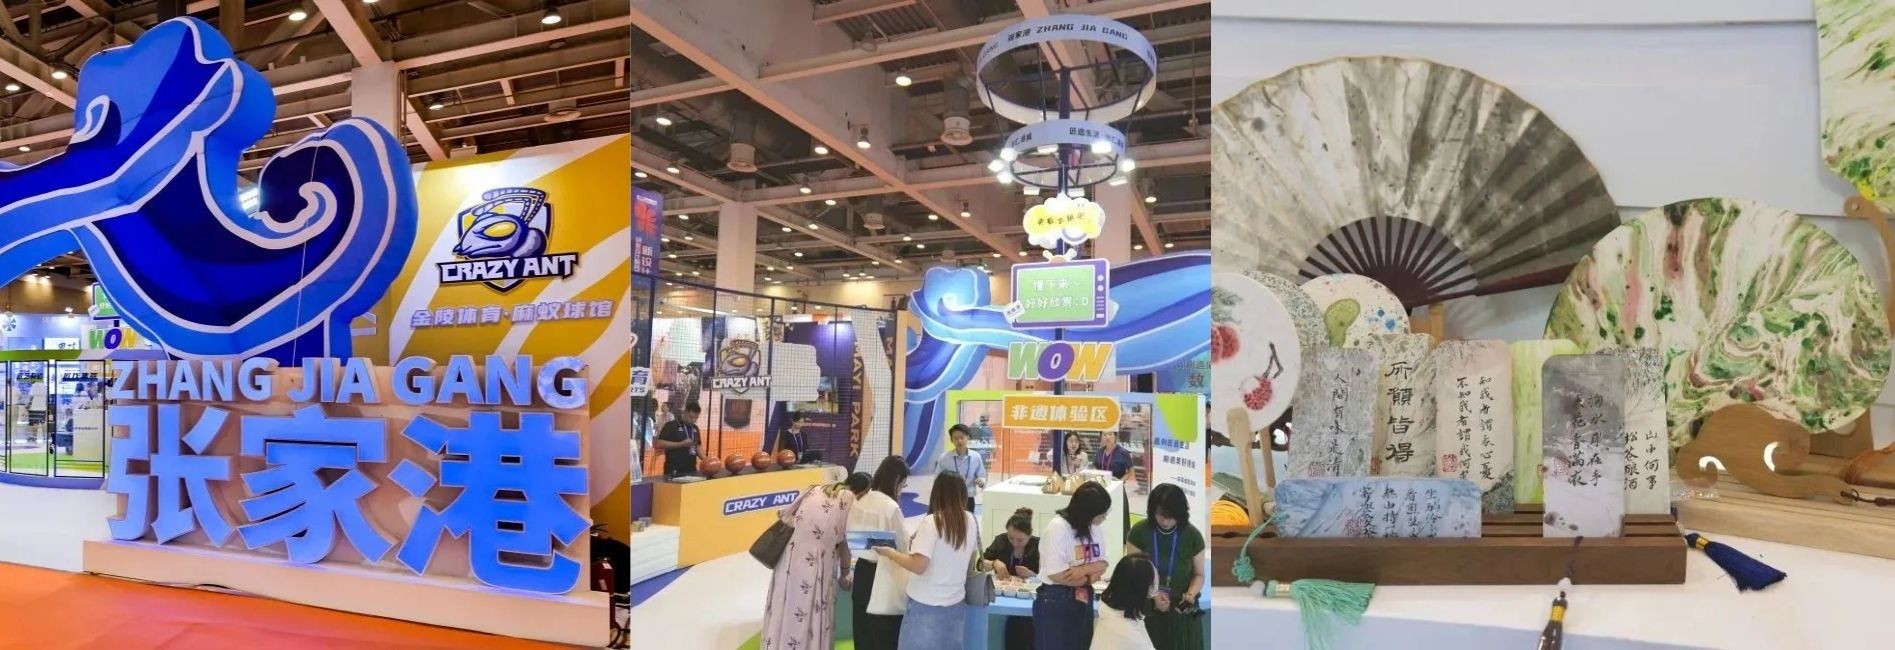 Zhangjiagang's creative design sector featured at expo